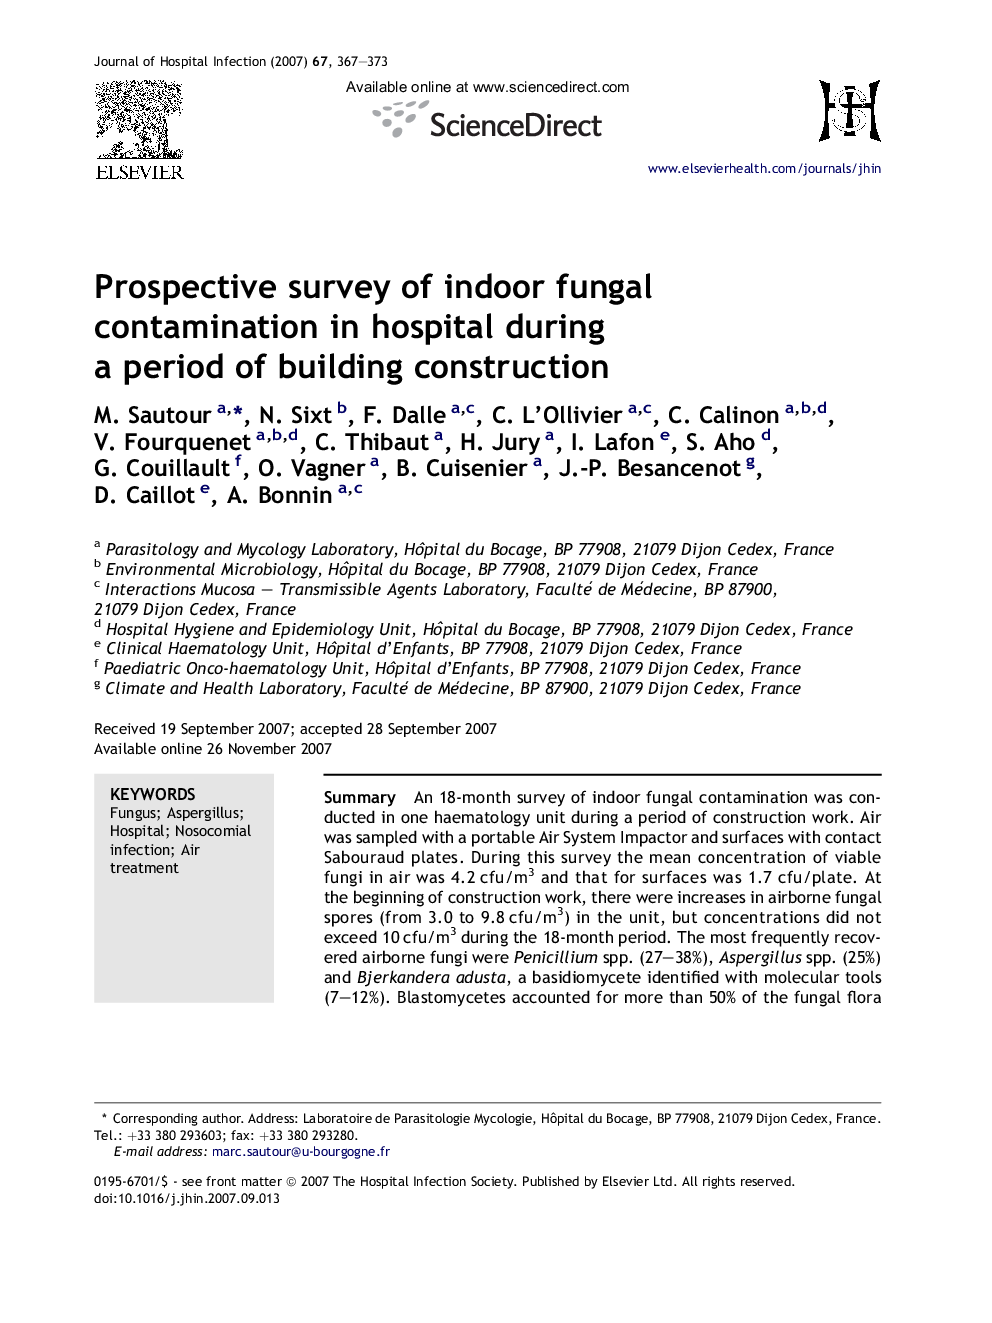 Prospective survey of indoor fungal contamination in hospital during a period of building construction